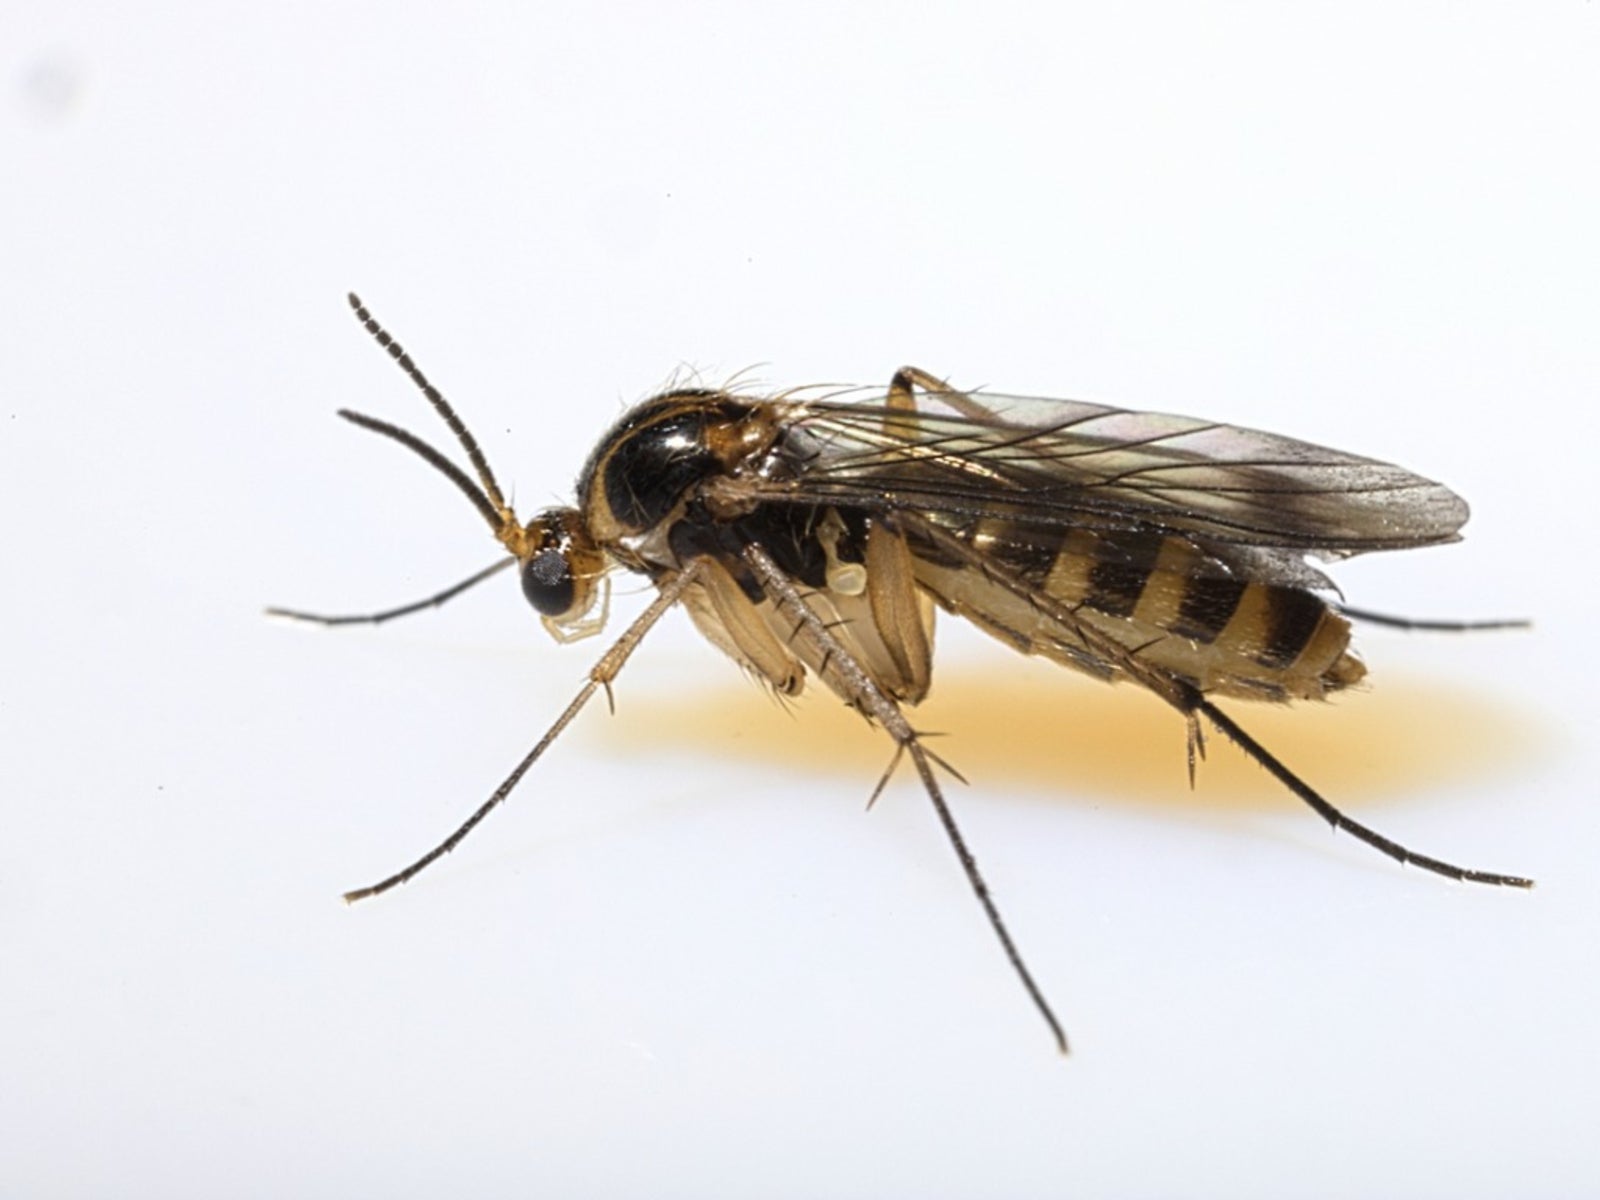 Those annoying little bugs aren't fruitflies, they're fungus gnats. Here's  how to get rid of them.